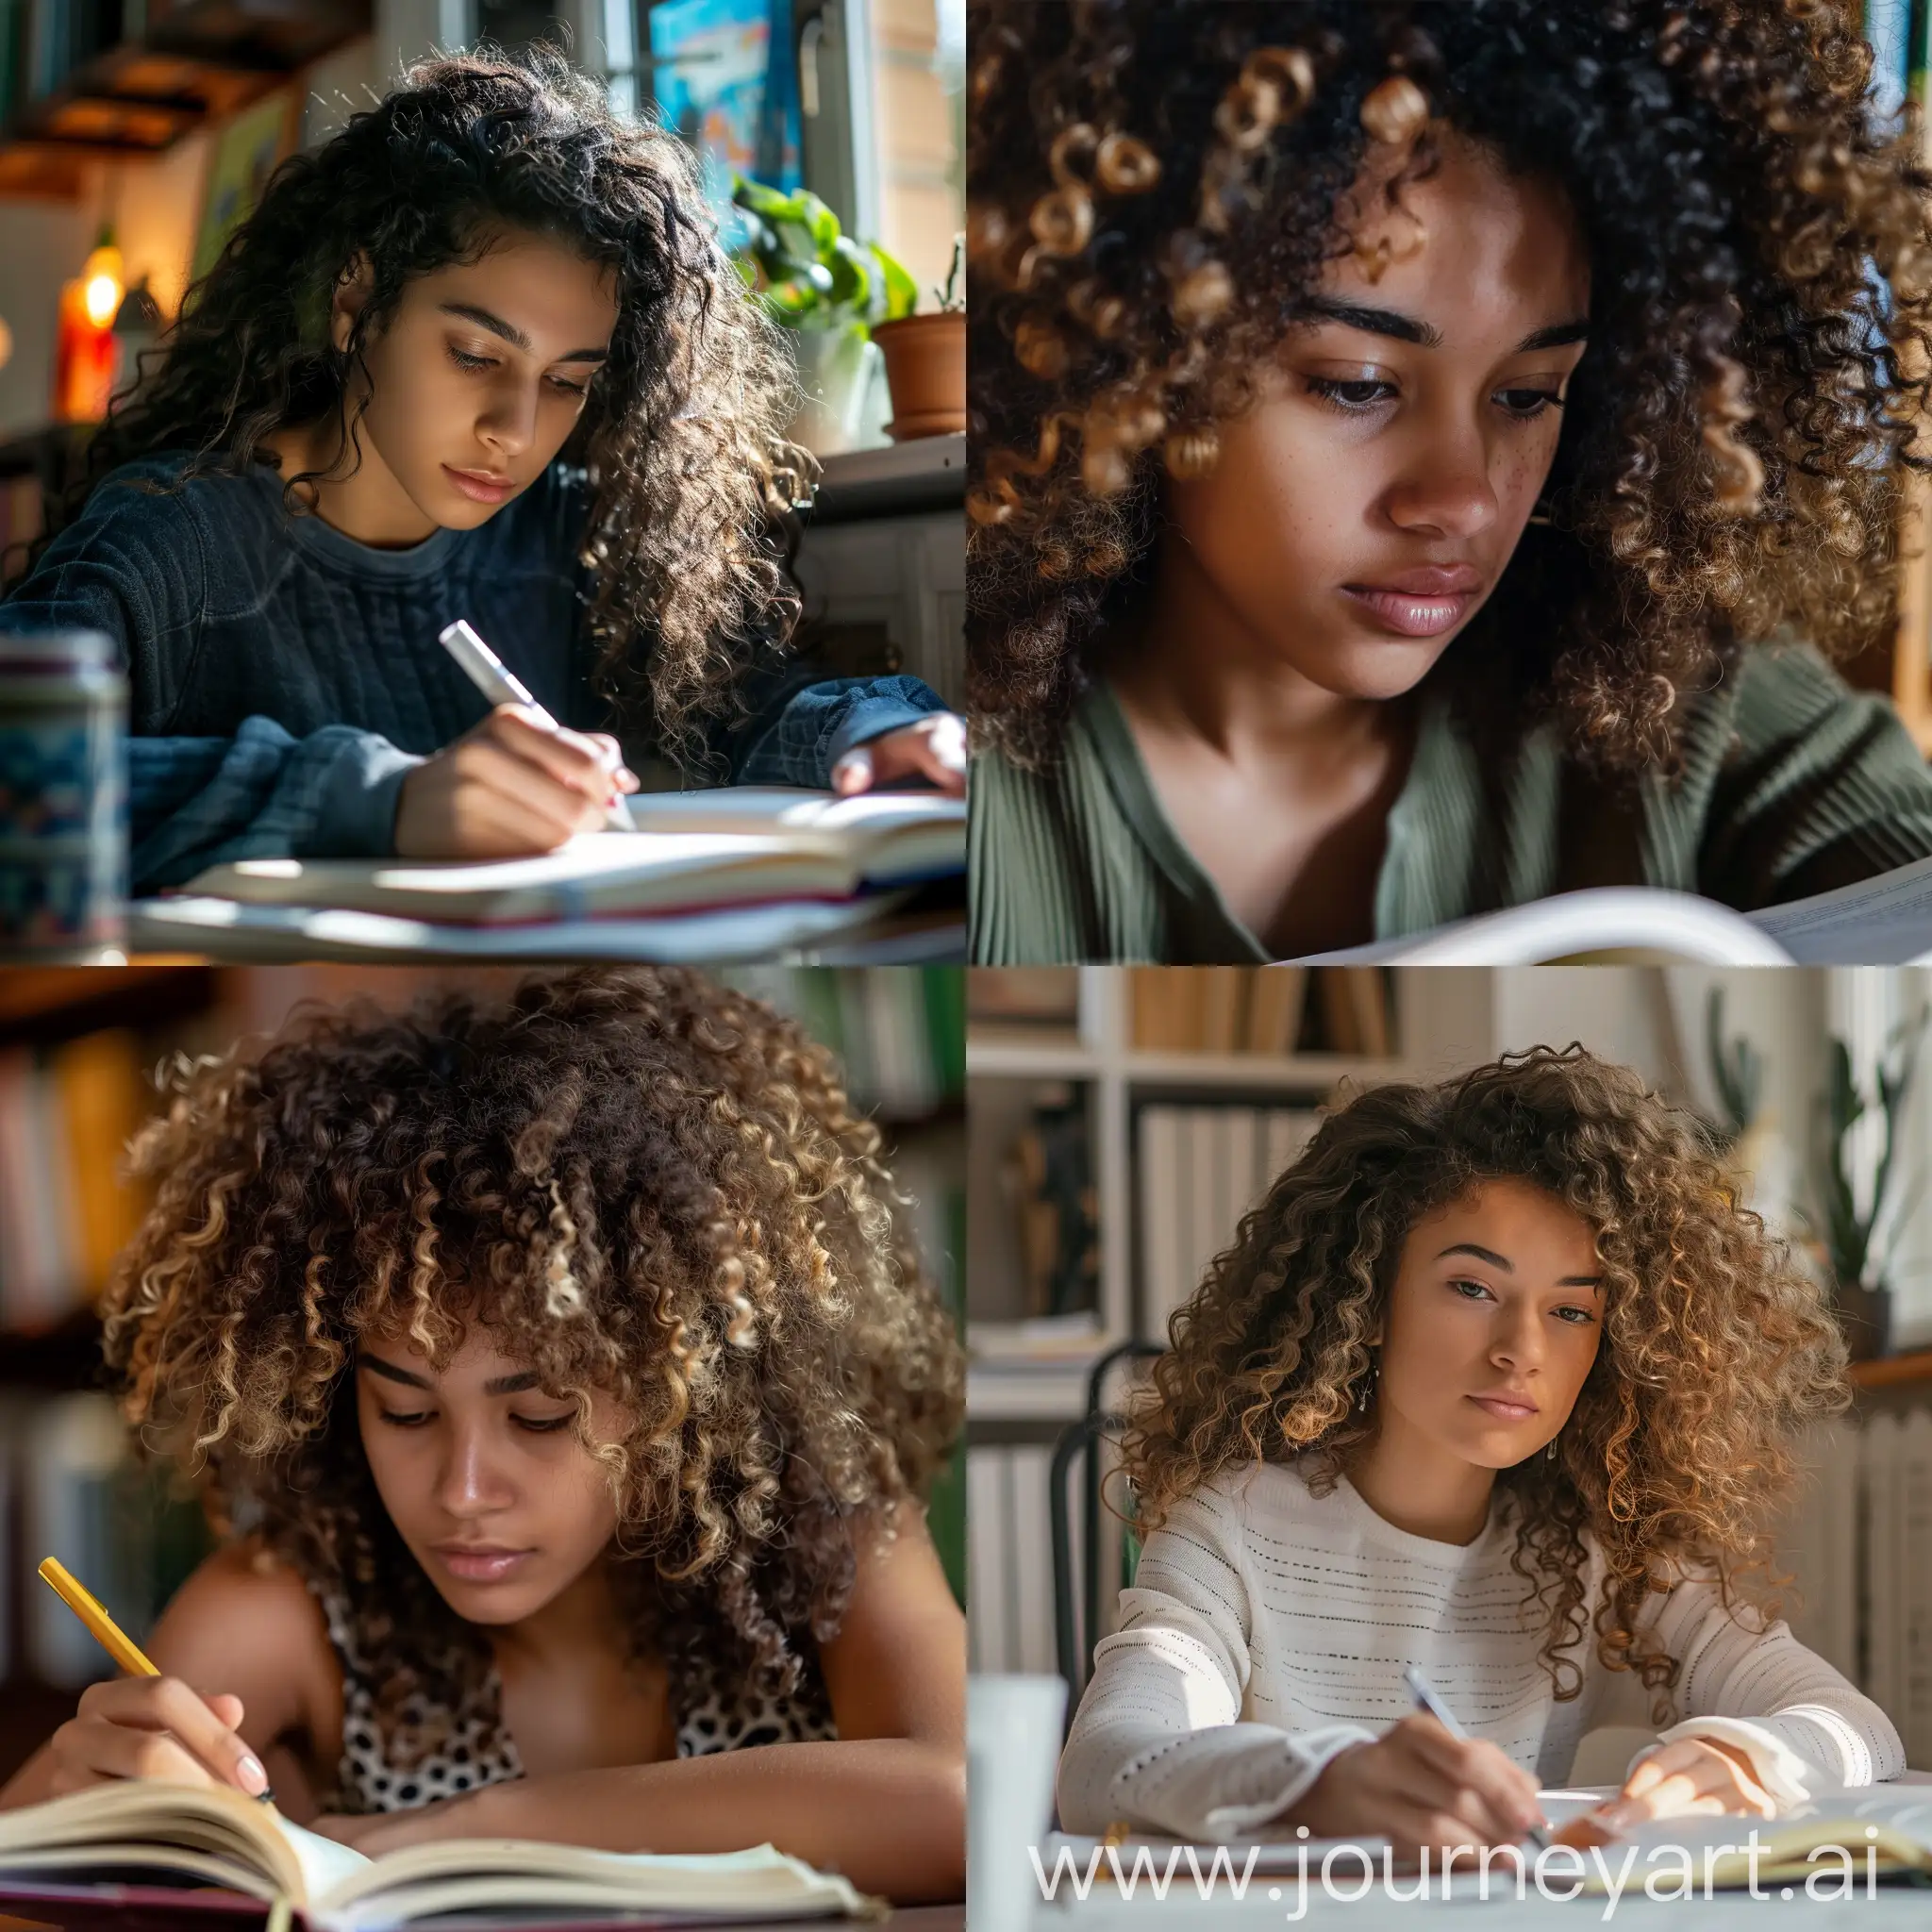 CurlyHaired-Girl-Studying